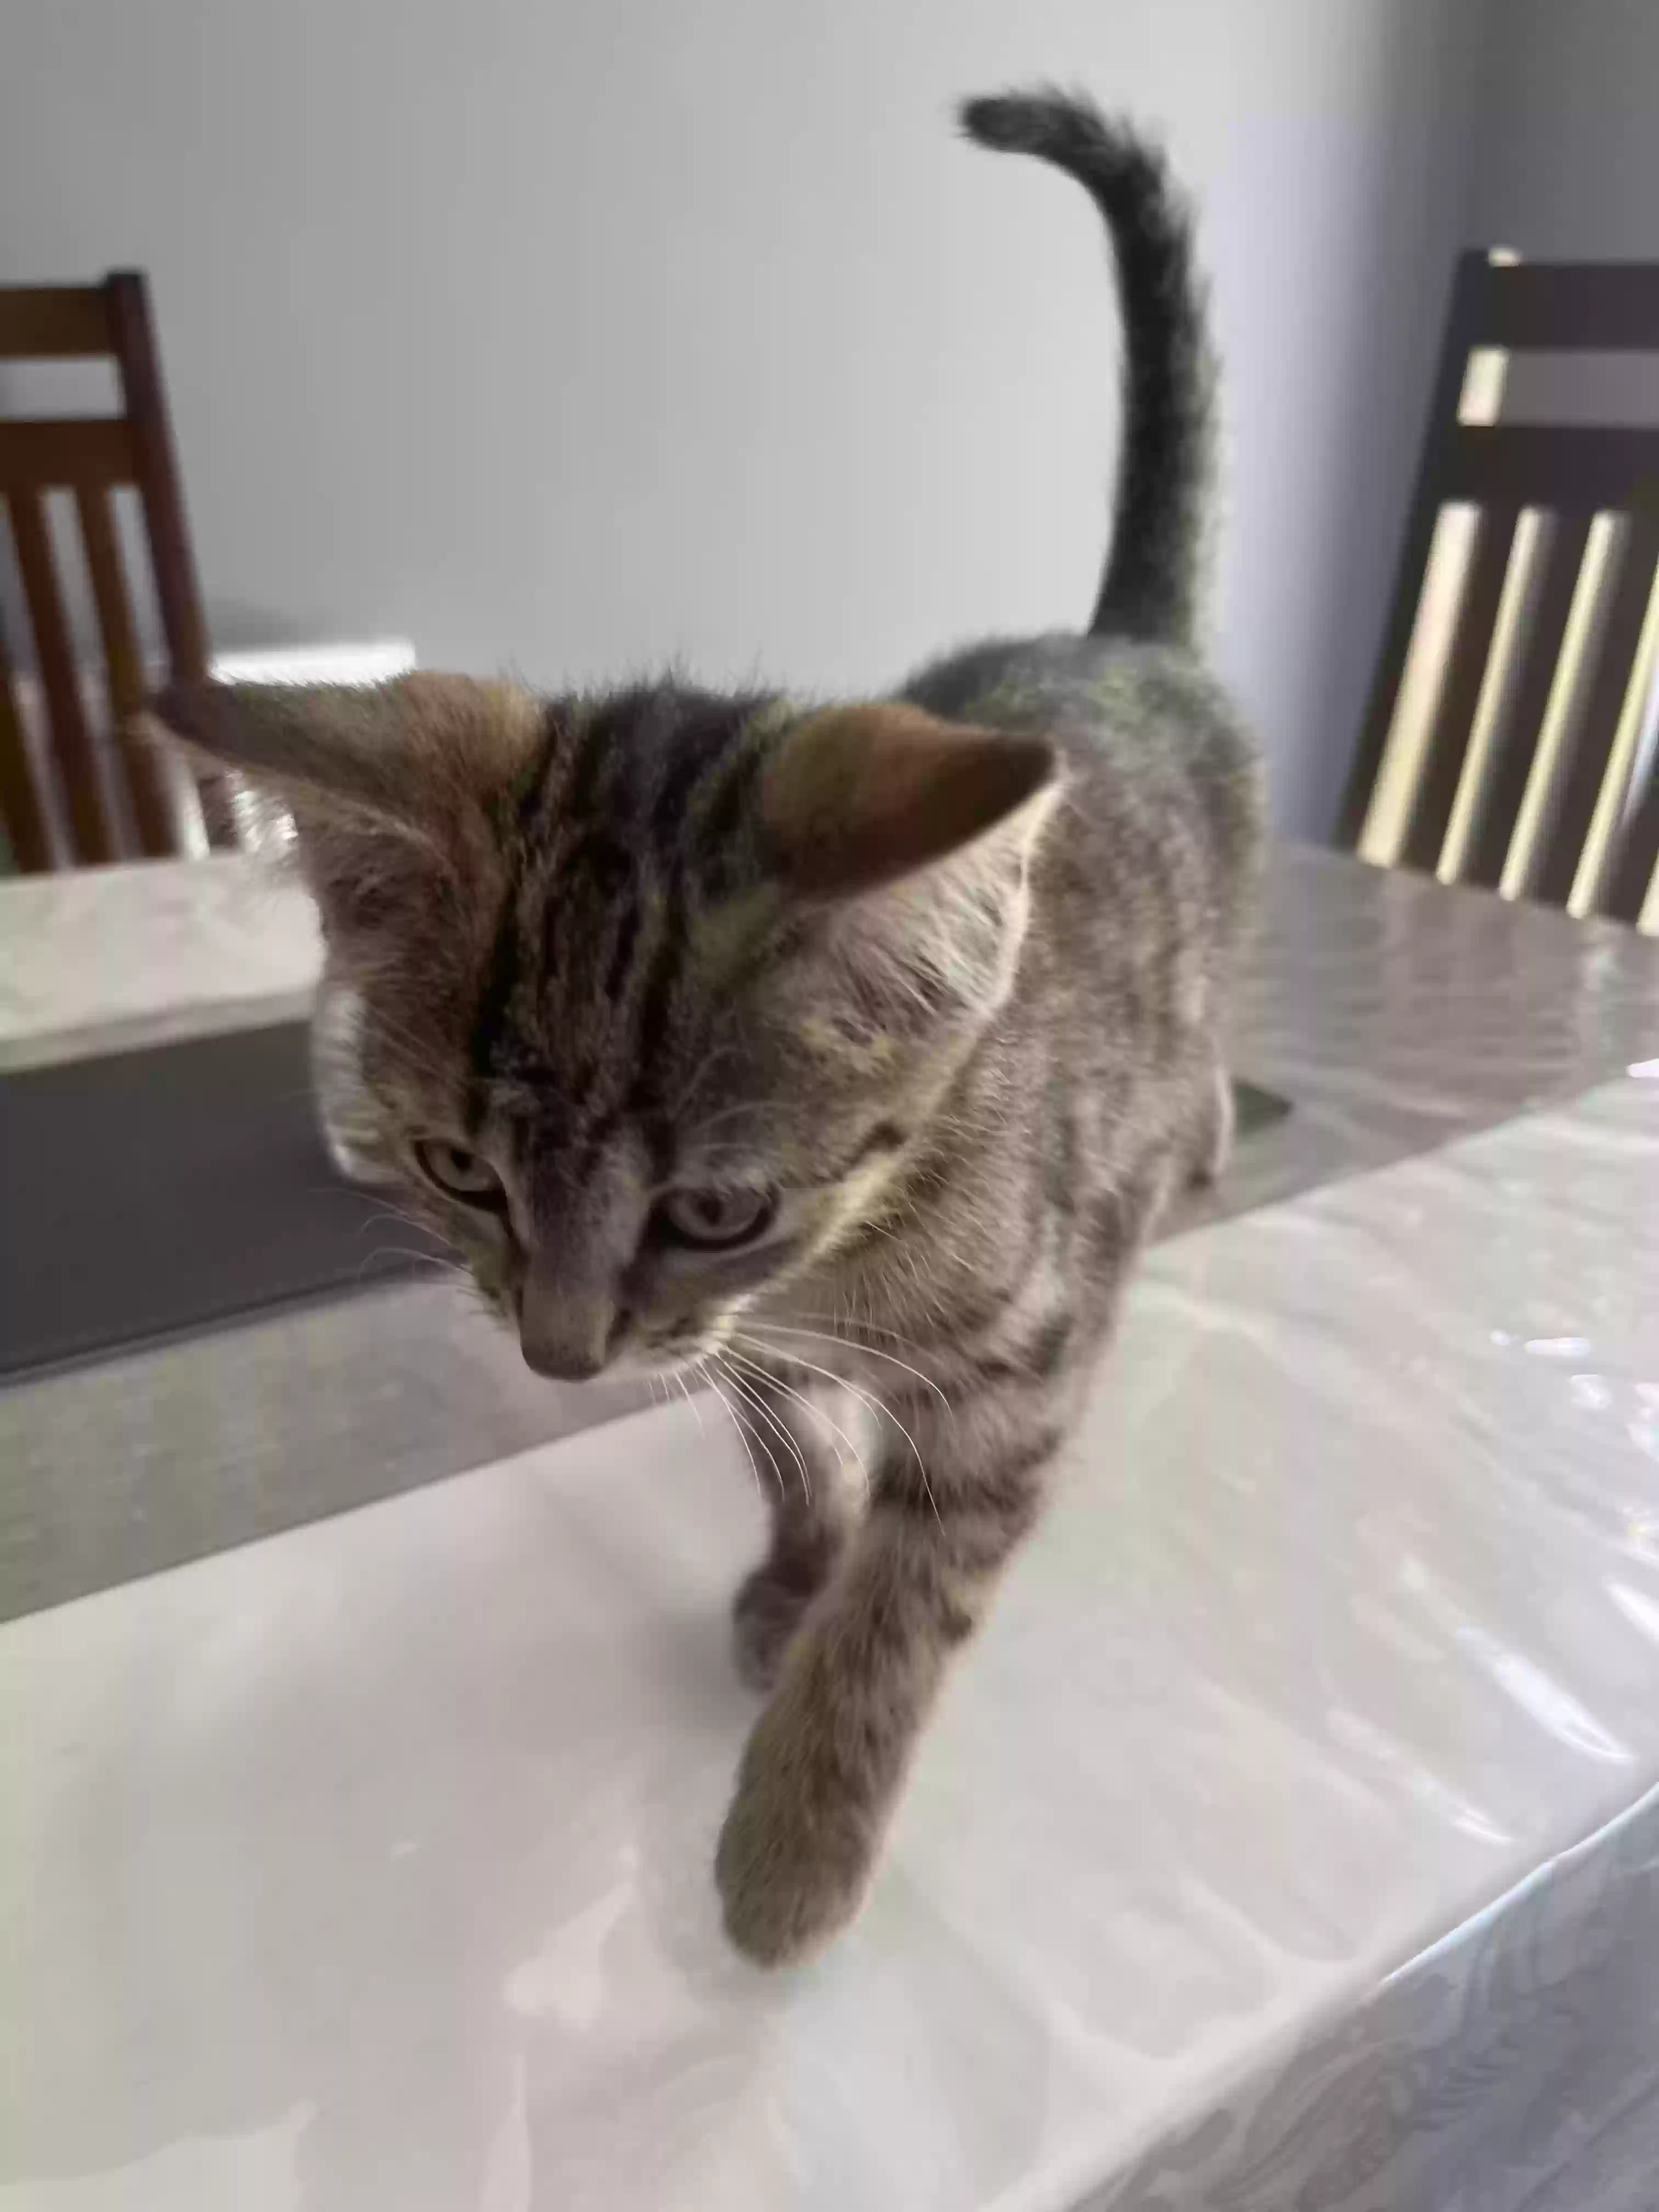 adoptable Cat in London,England named Nyla